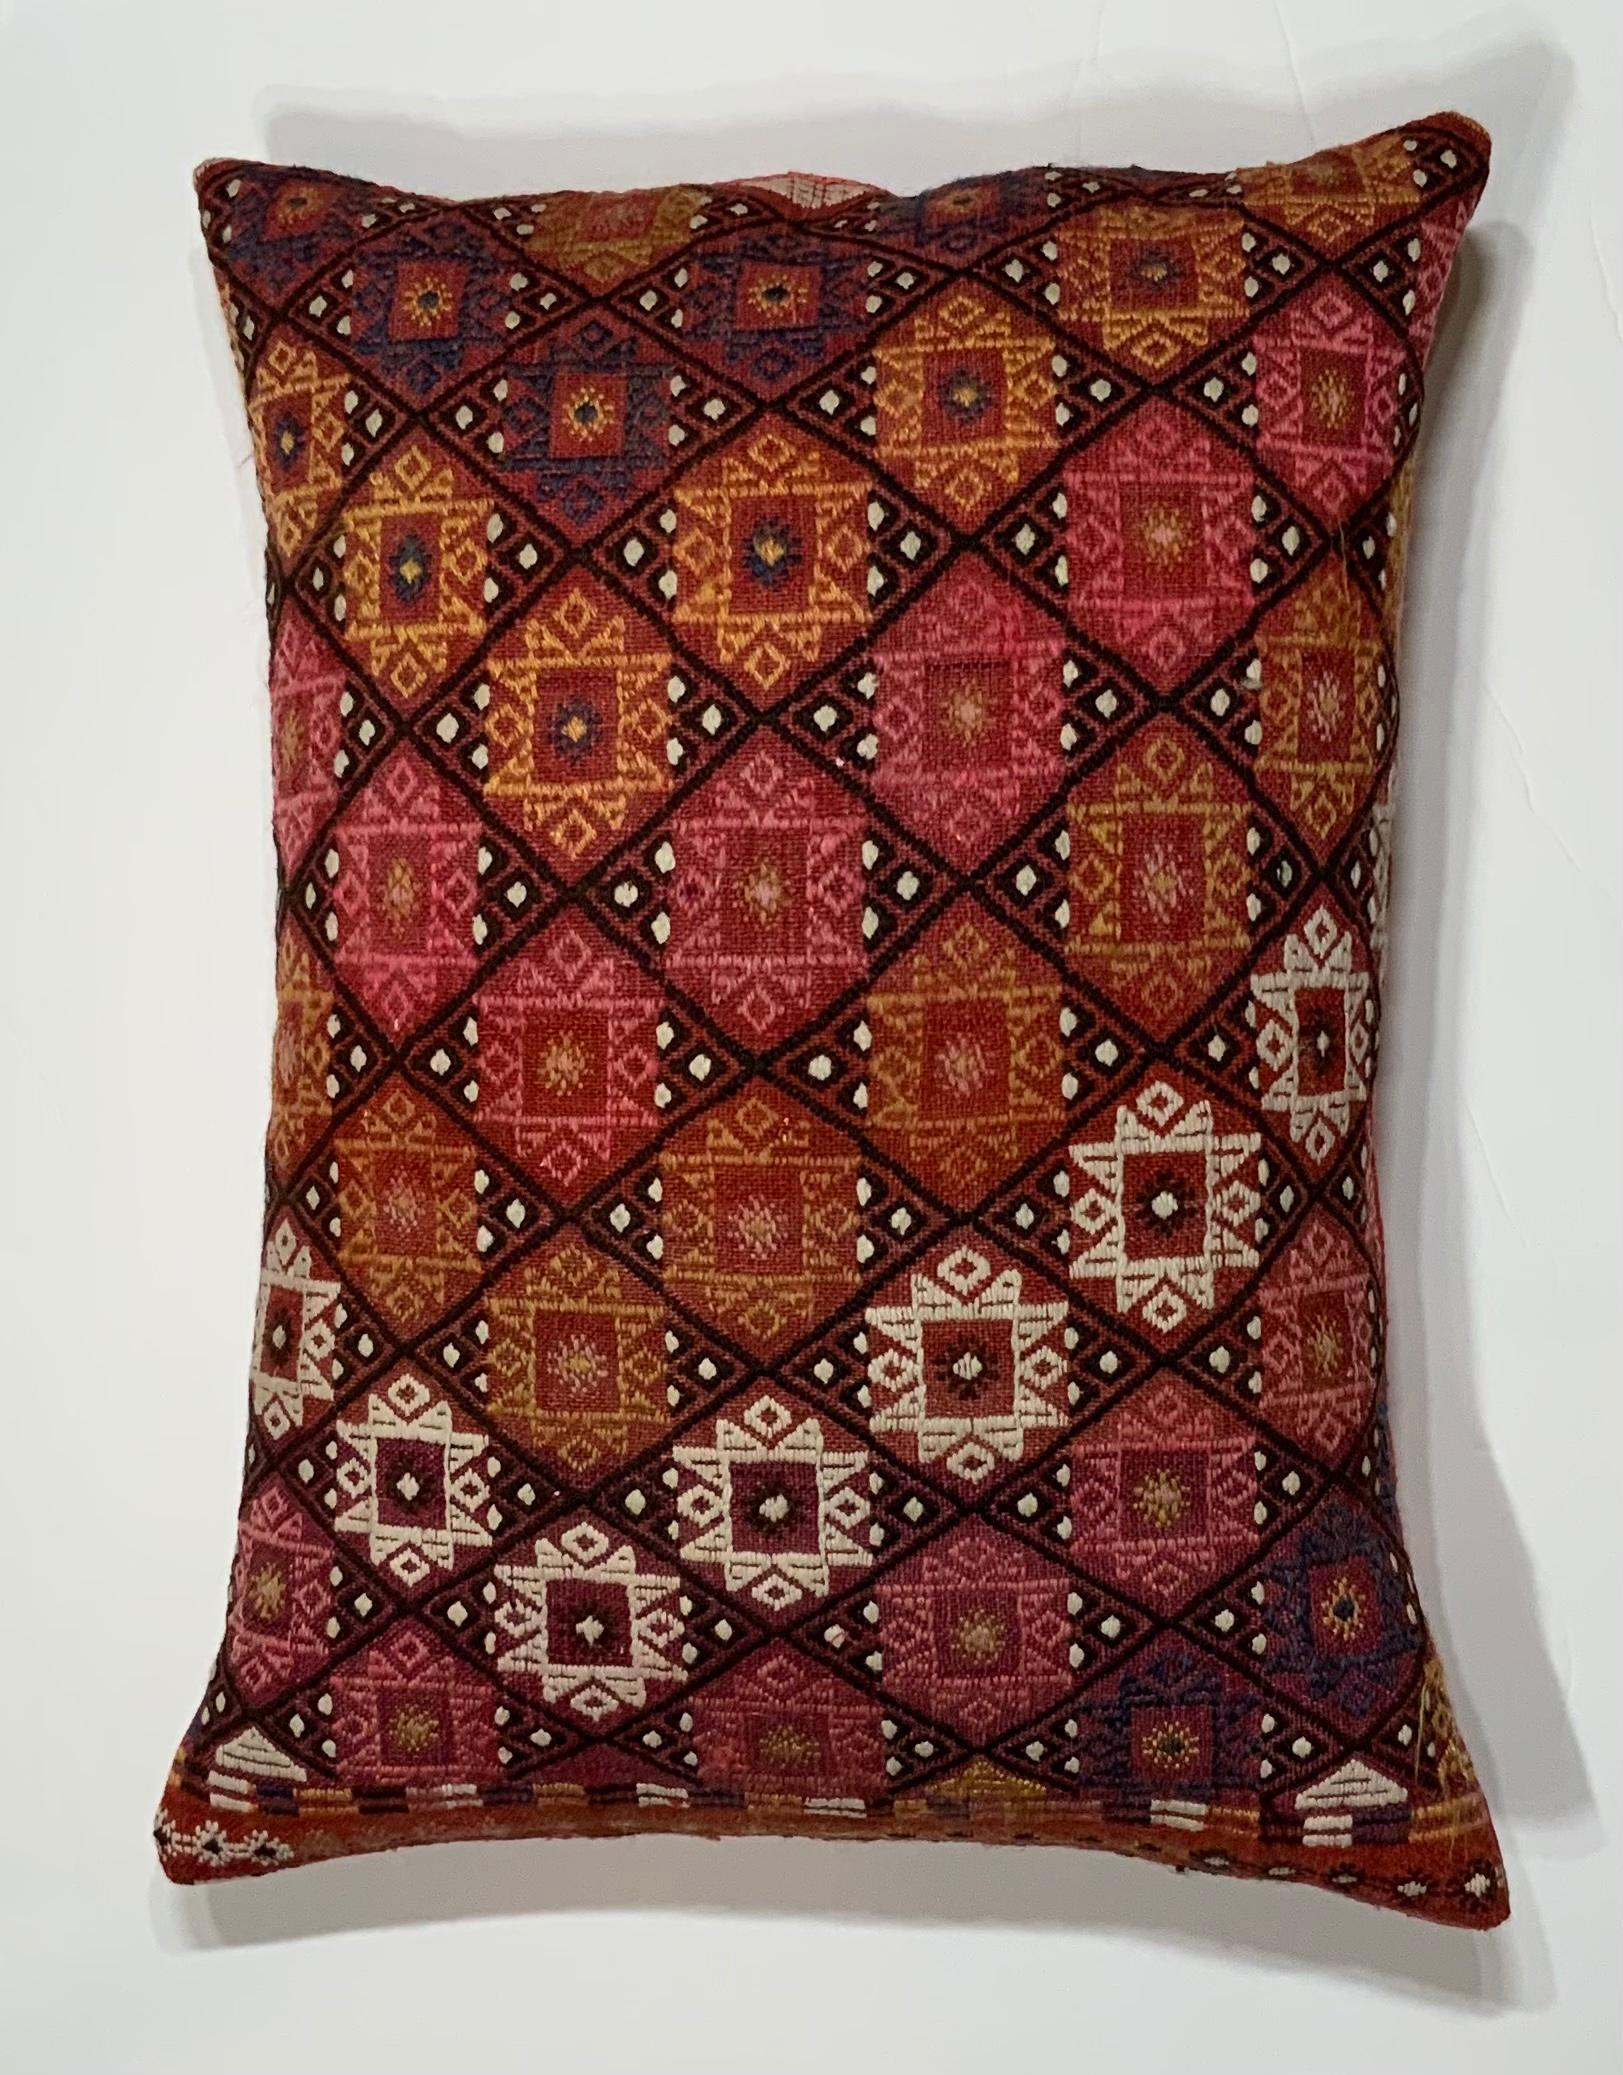 Beautiful pillow made of hand embroidery with exceptional happy colors of geometric repeated motifs. Quality silk backing, fresh new insert.